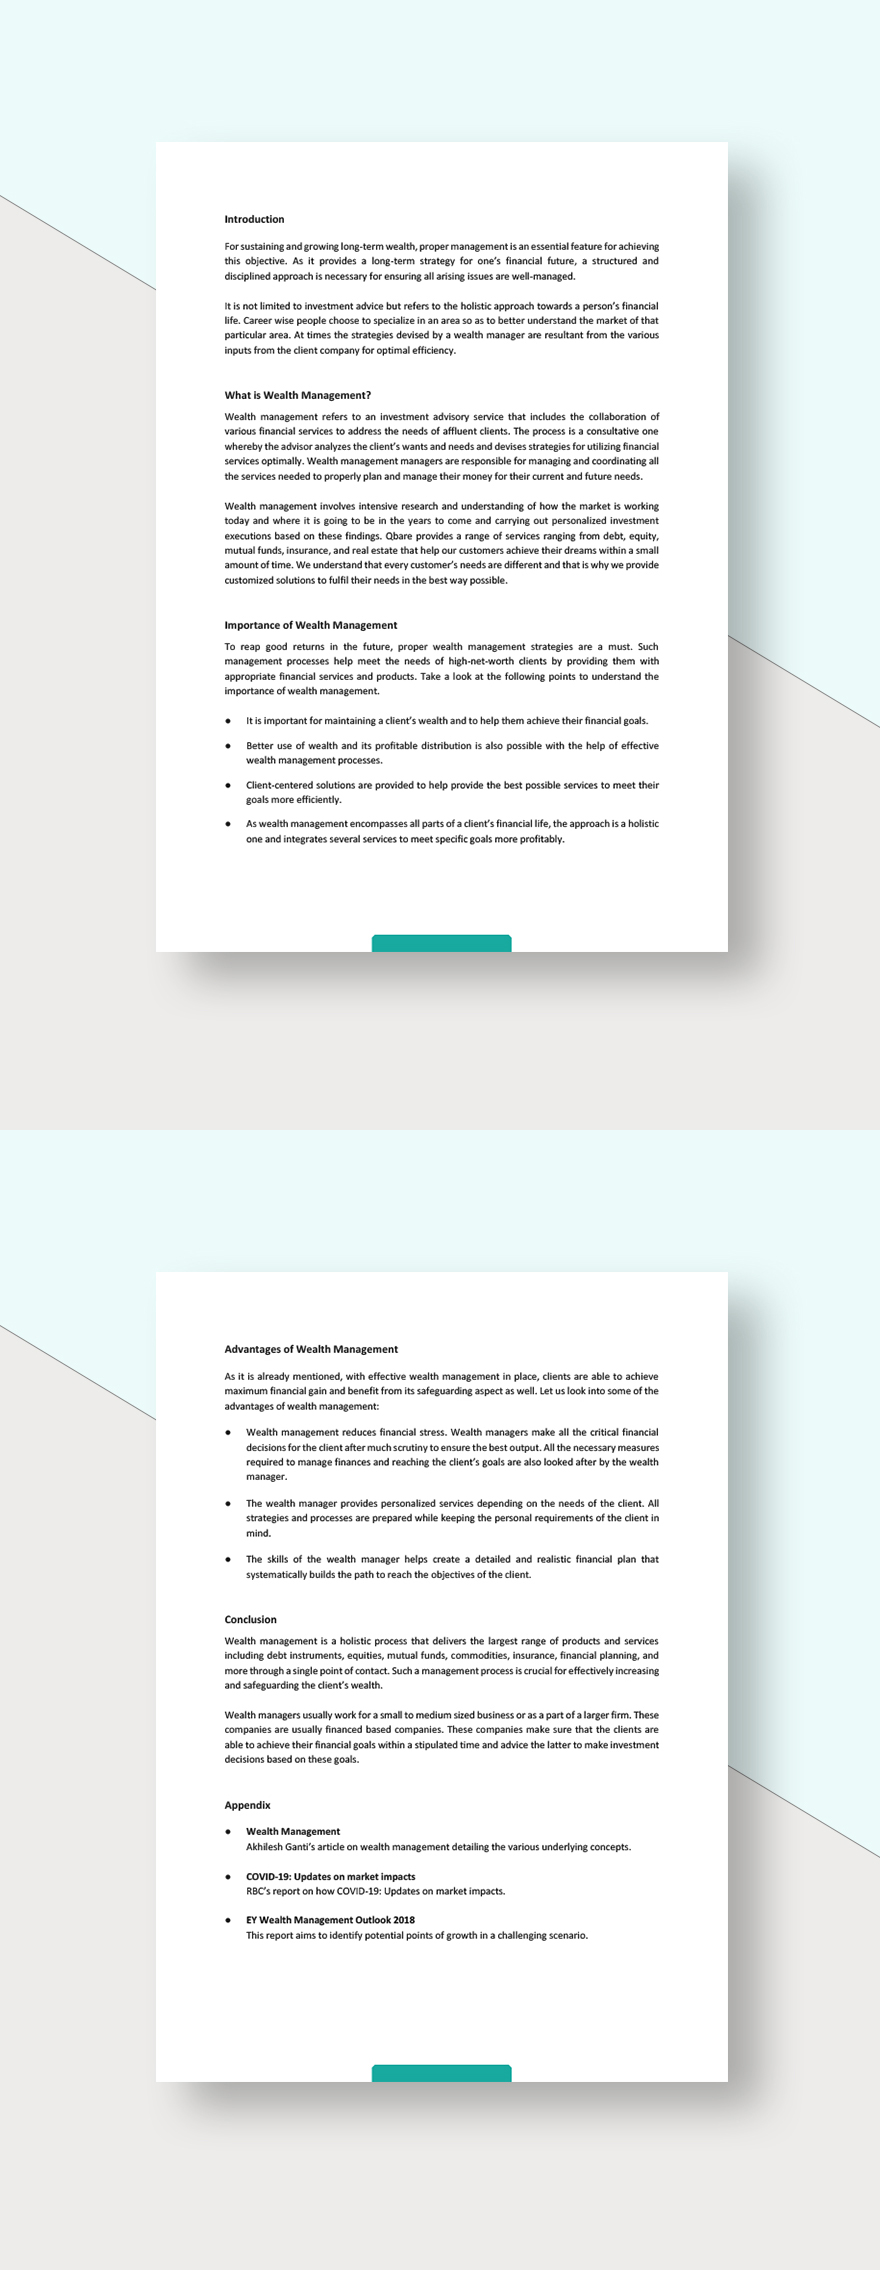 Wealth Management White Paper Template